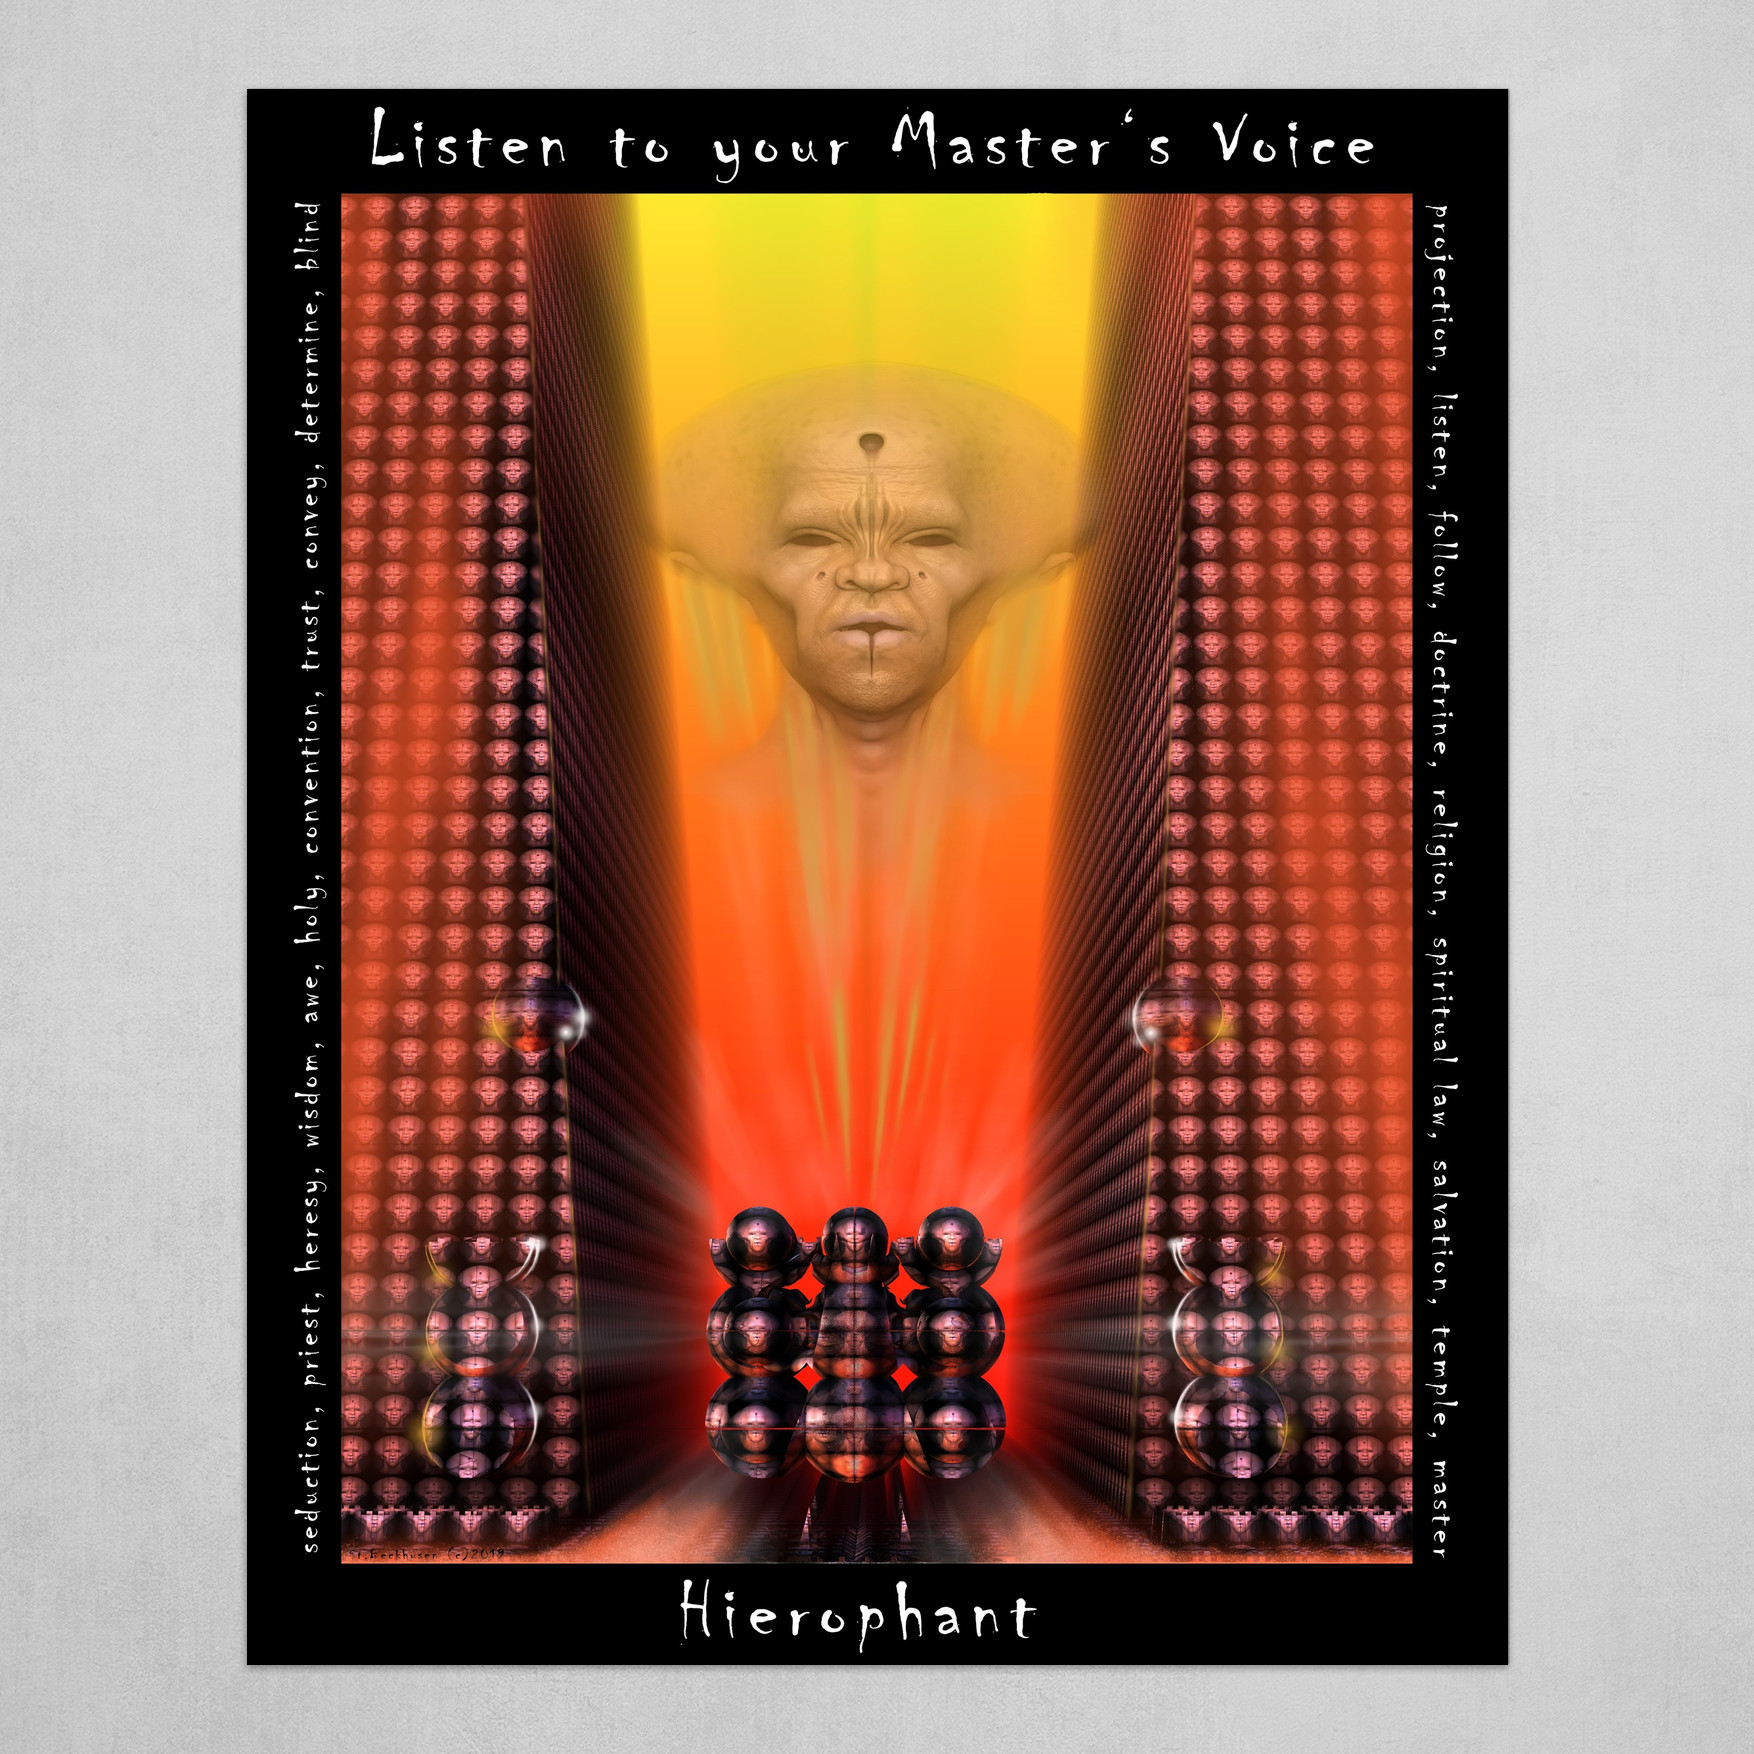 LISTEN TO YOUR MASTER'S VOICE  - Hierophant